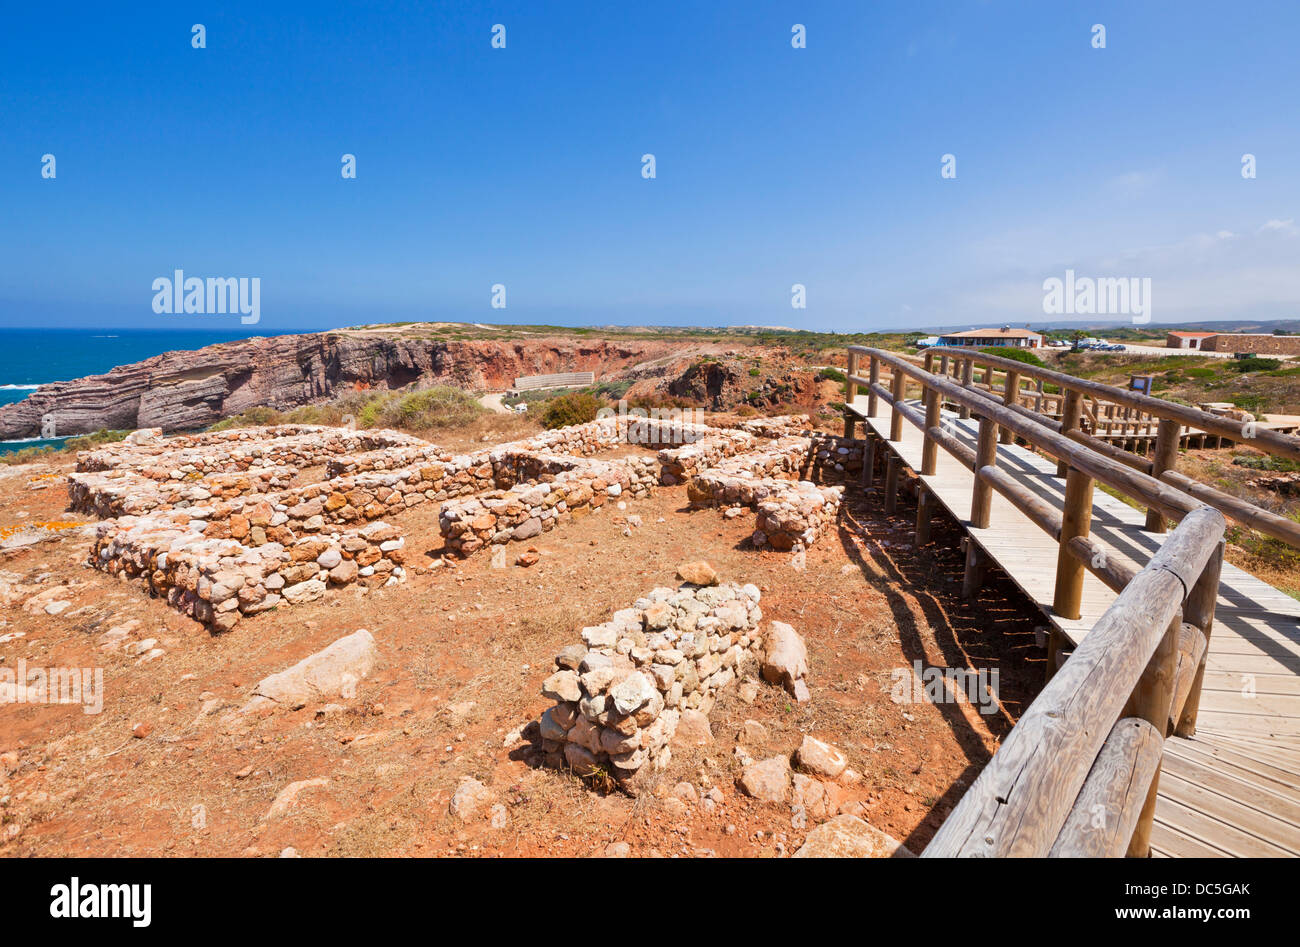 archaeological dig around ruins of an Islamic Fishermen village found on the clifftops close to Carrapateira Algarve Portugal Stock Photo